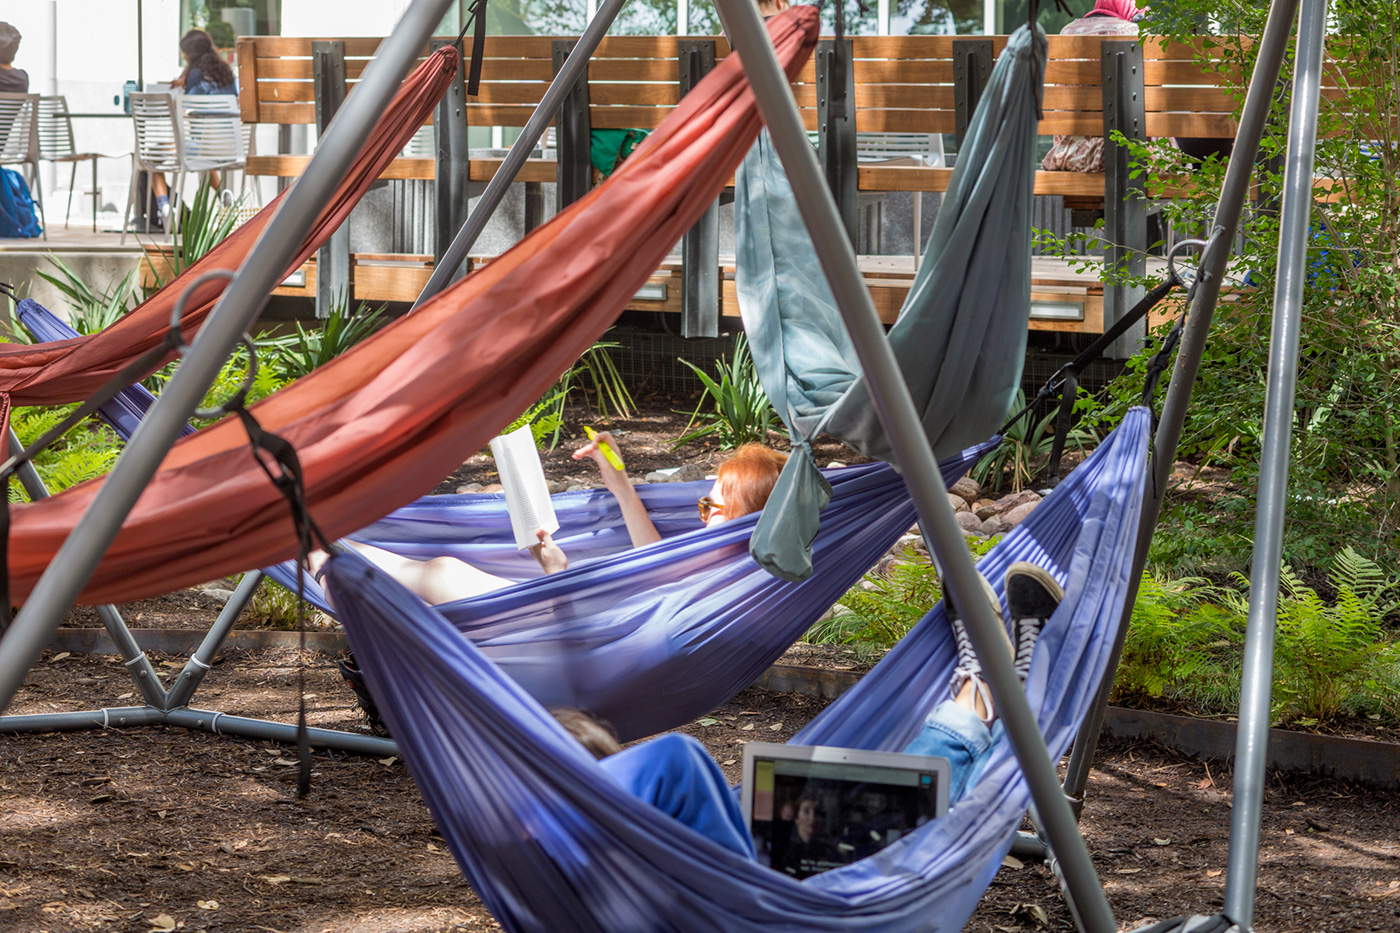 People relaxing in hammocks connected to a metal structure.